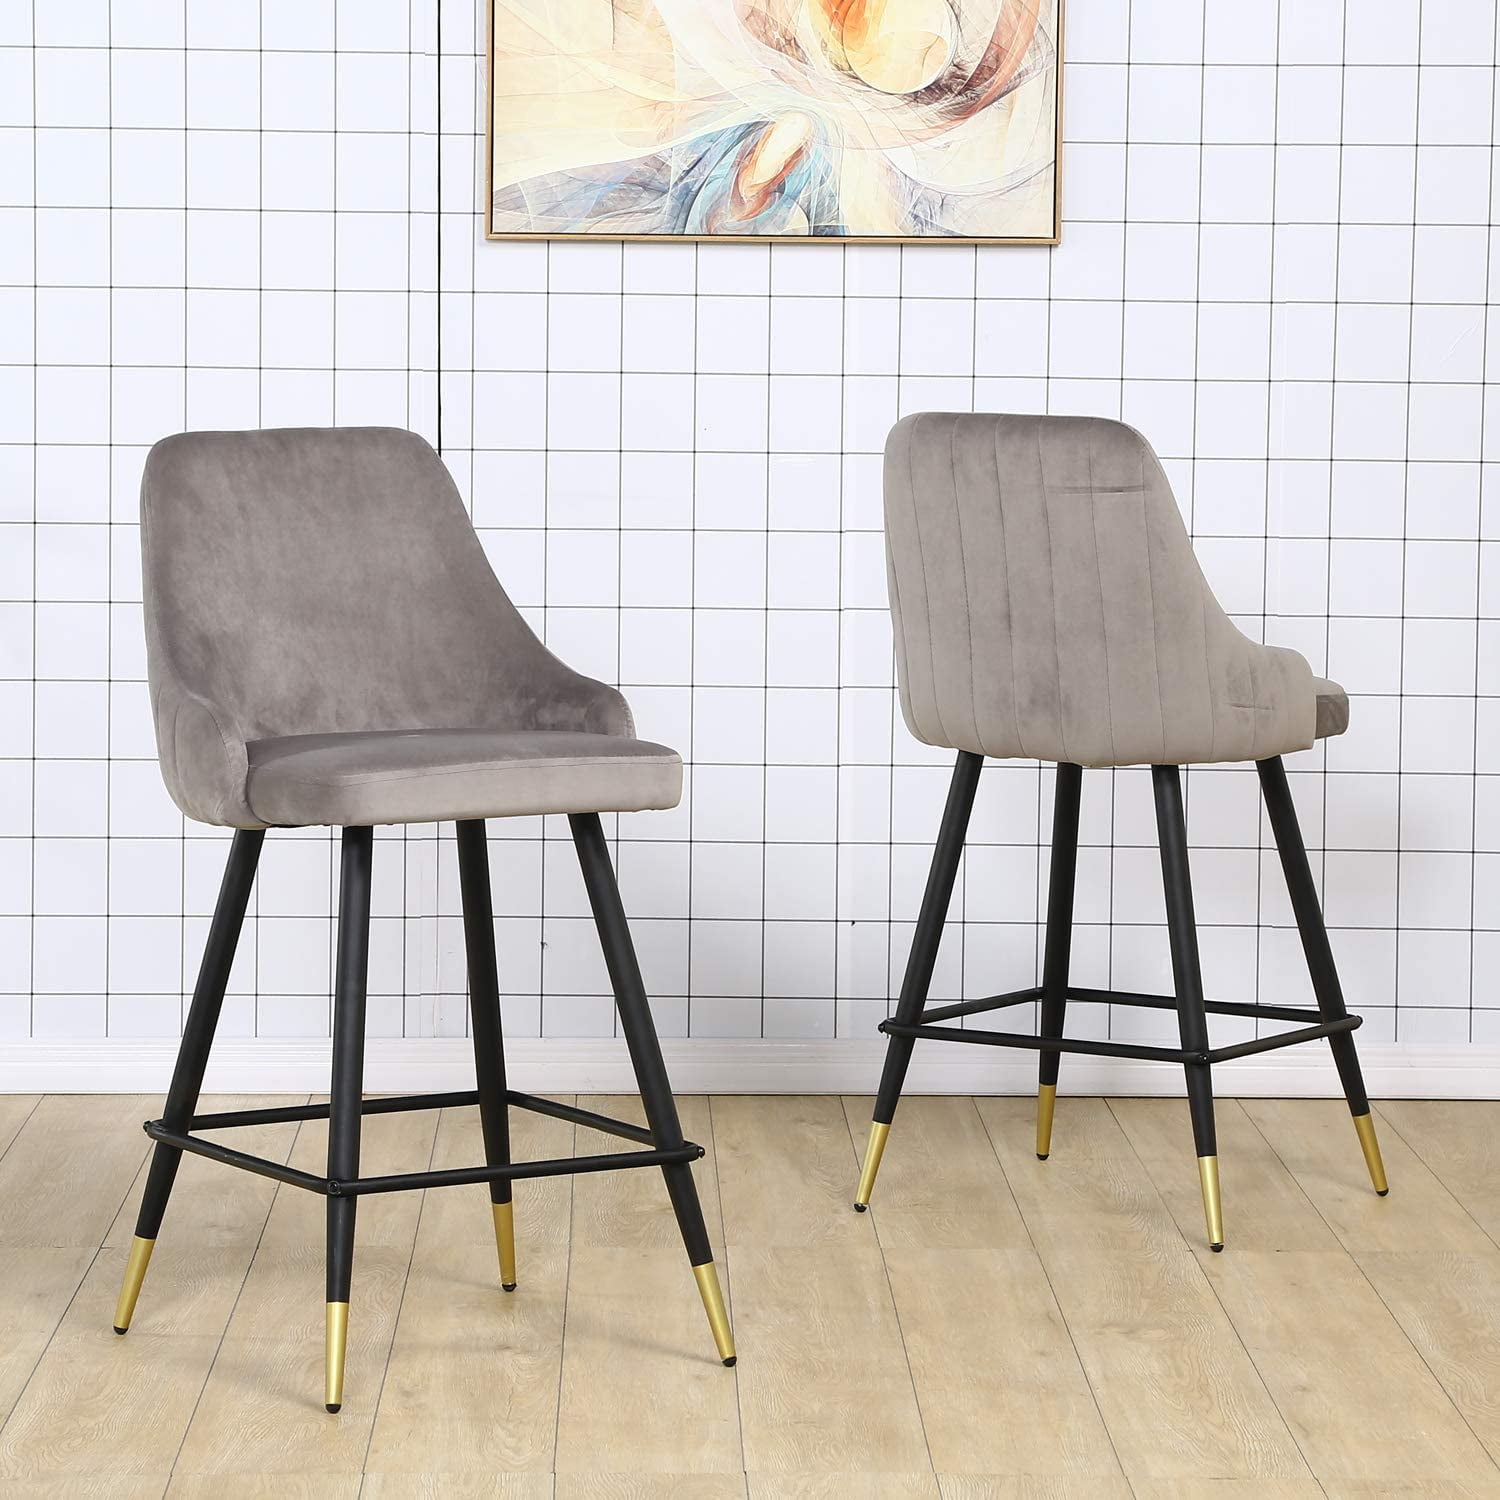 Details about   Myrick Set of 2 Bar Stool Rustic Barstools with Back and Footrest Counter Height 